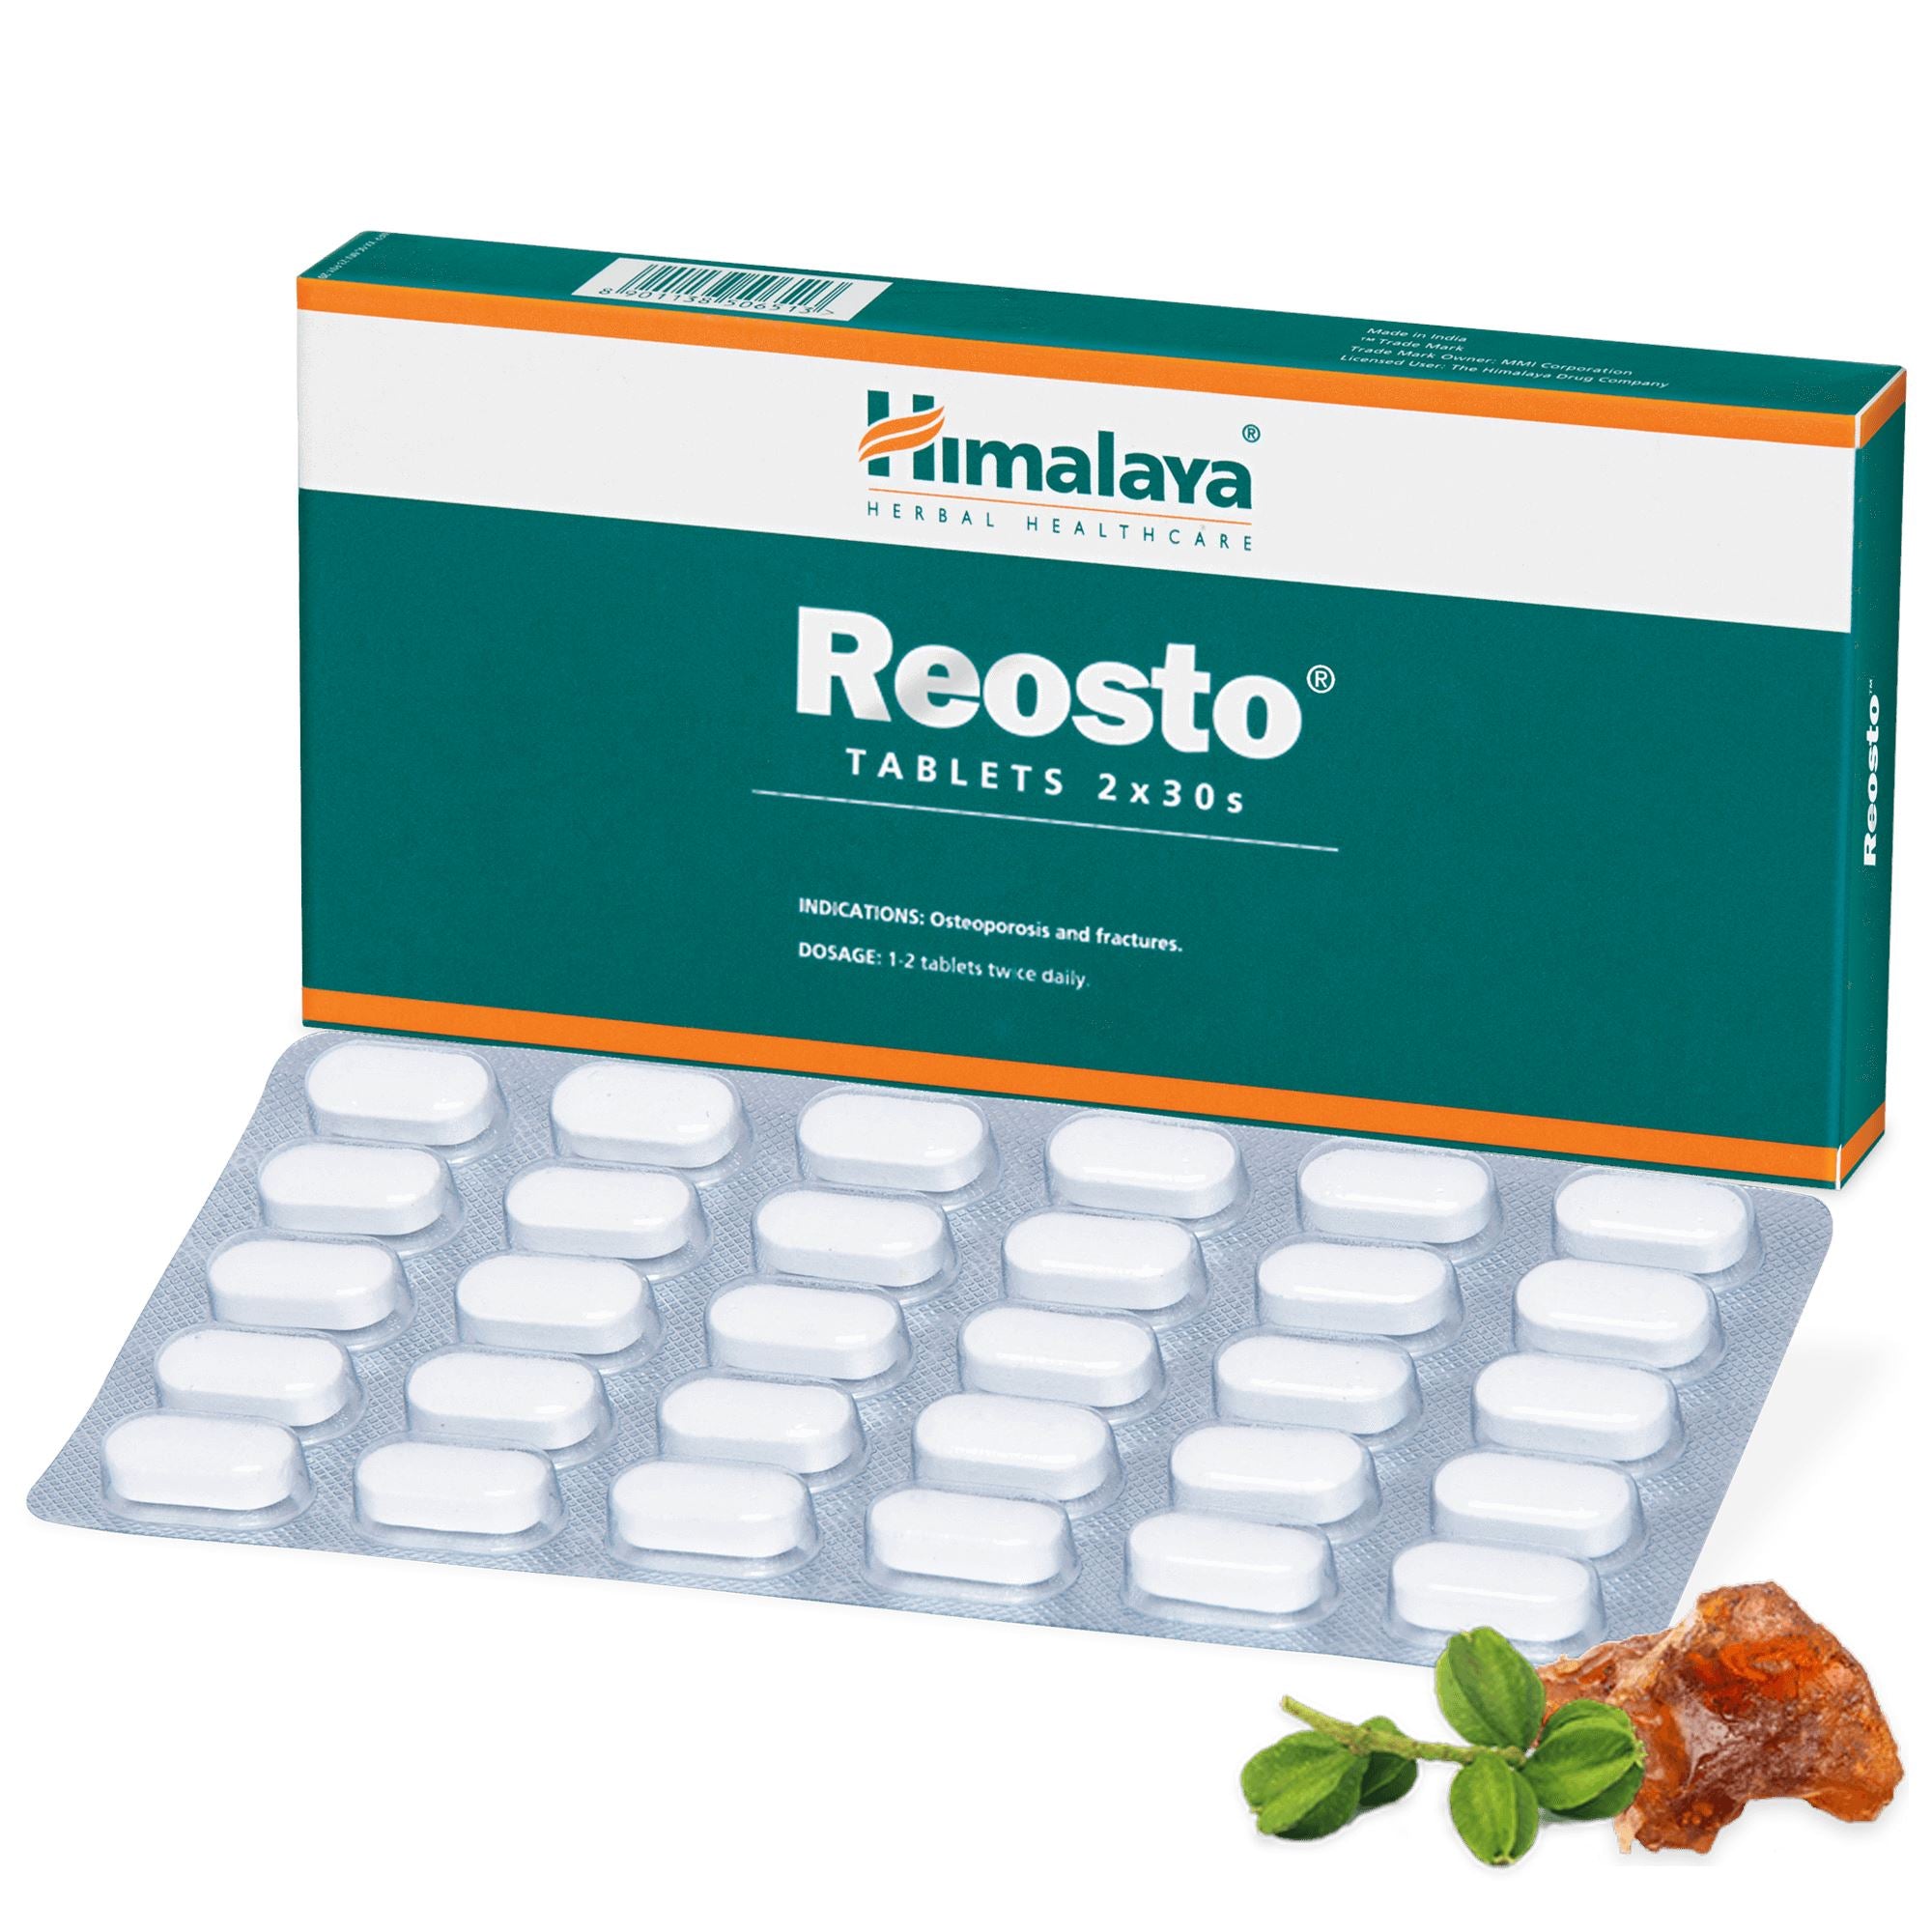 Himalaya Reosto - Manages osteoporosis and related bone fractures